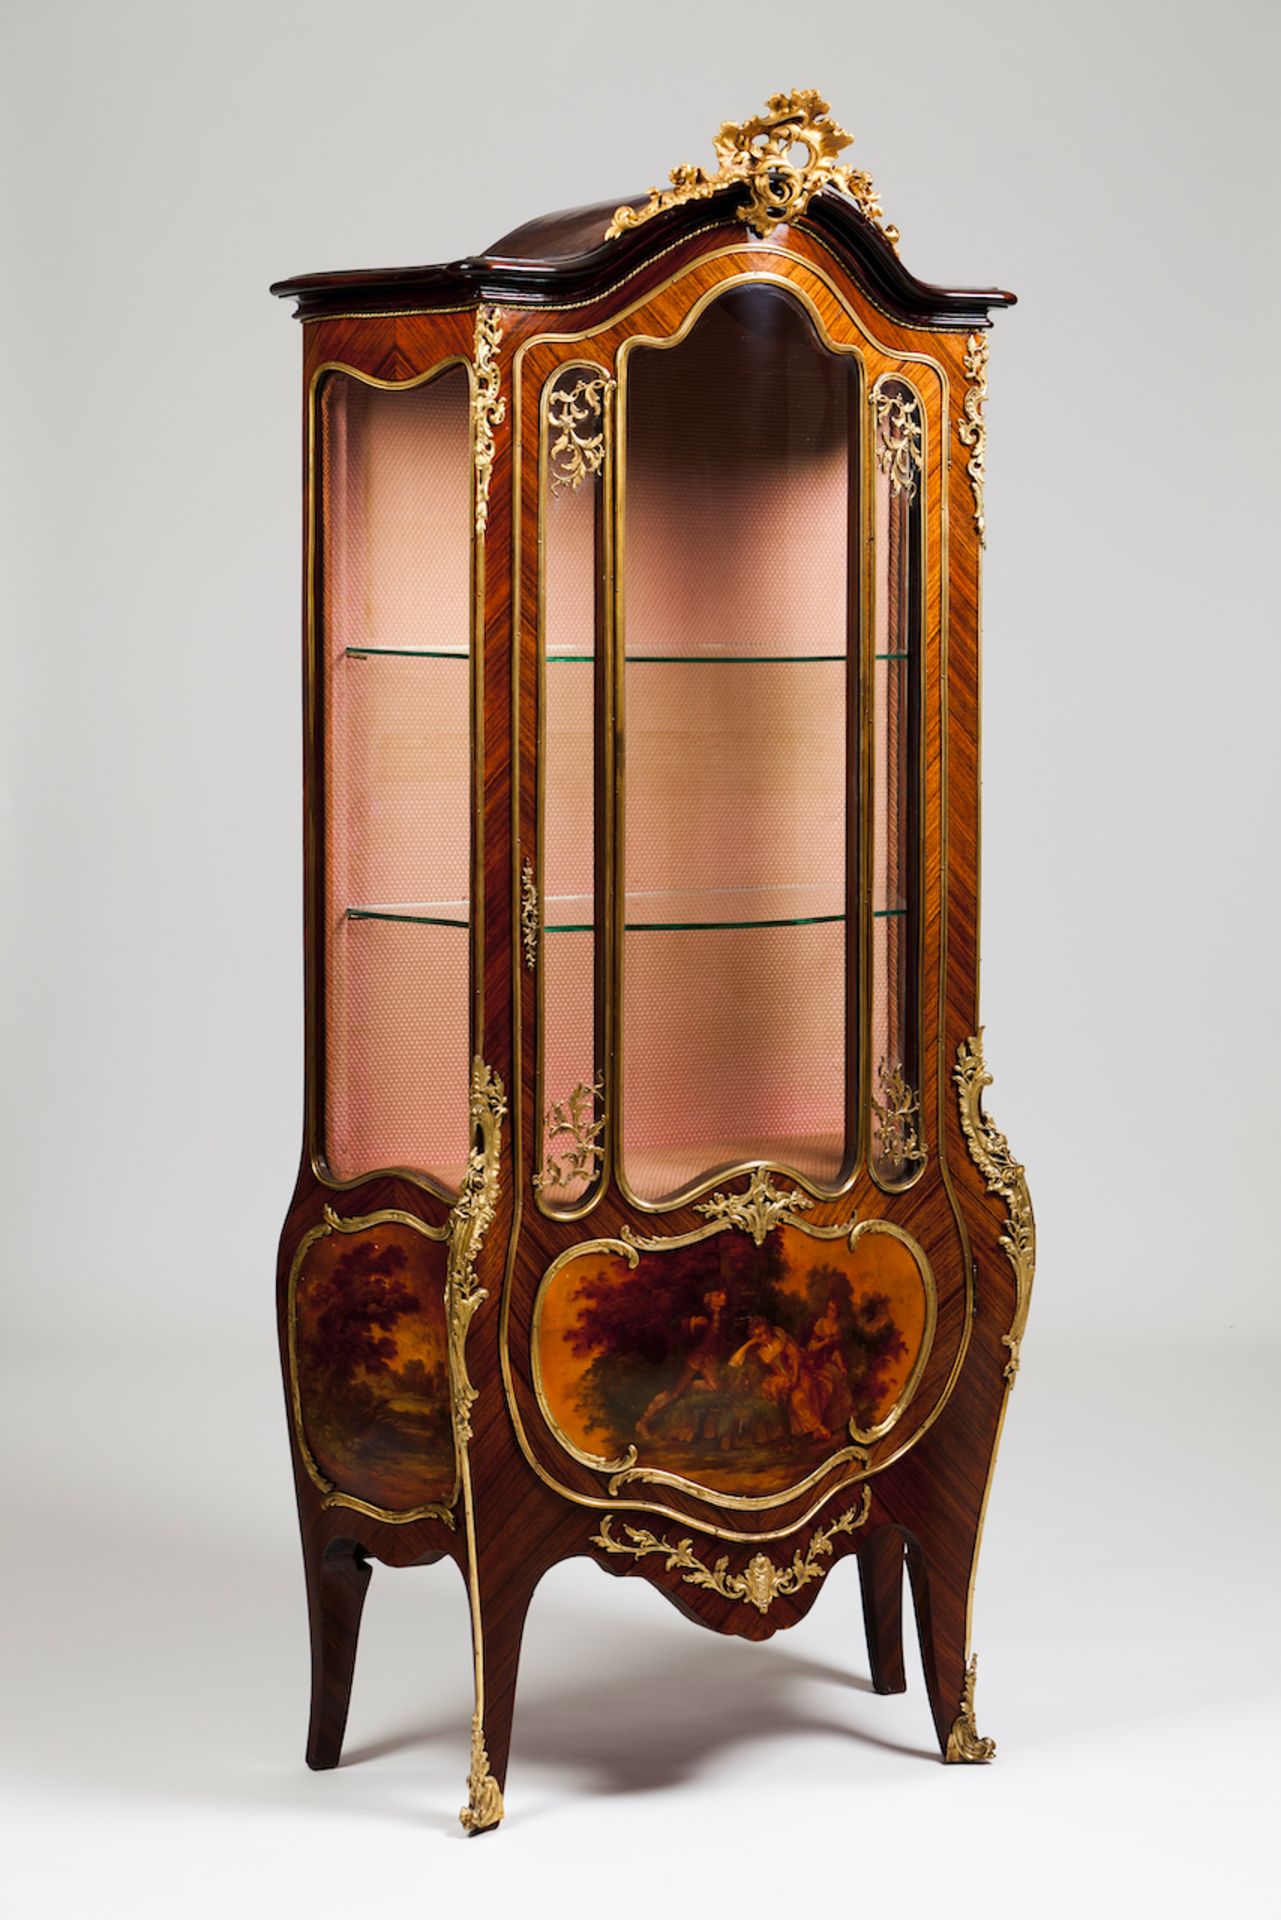 A Louis XV style display cabinetRosewood veneered of gilt bronze mountsFront and sides of painted